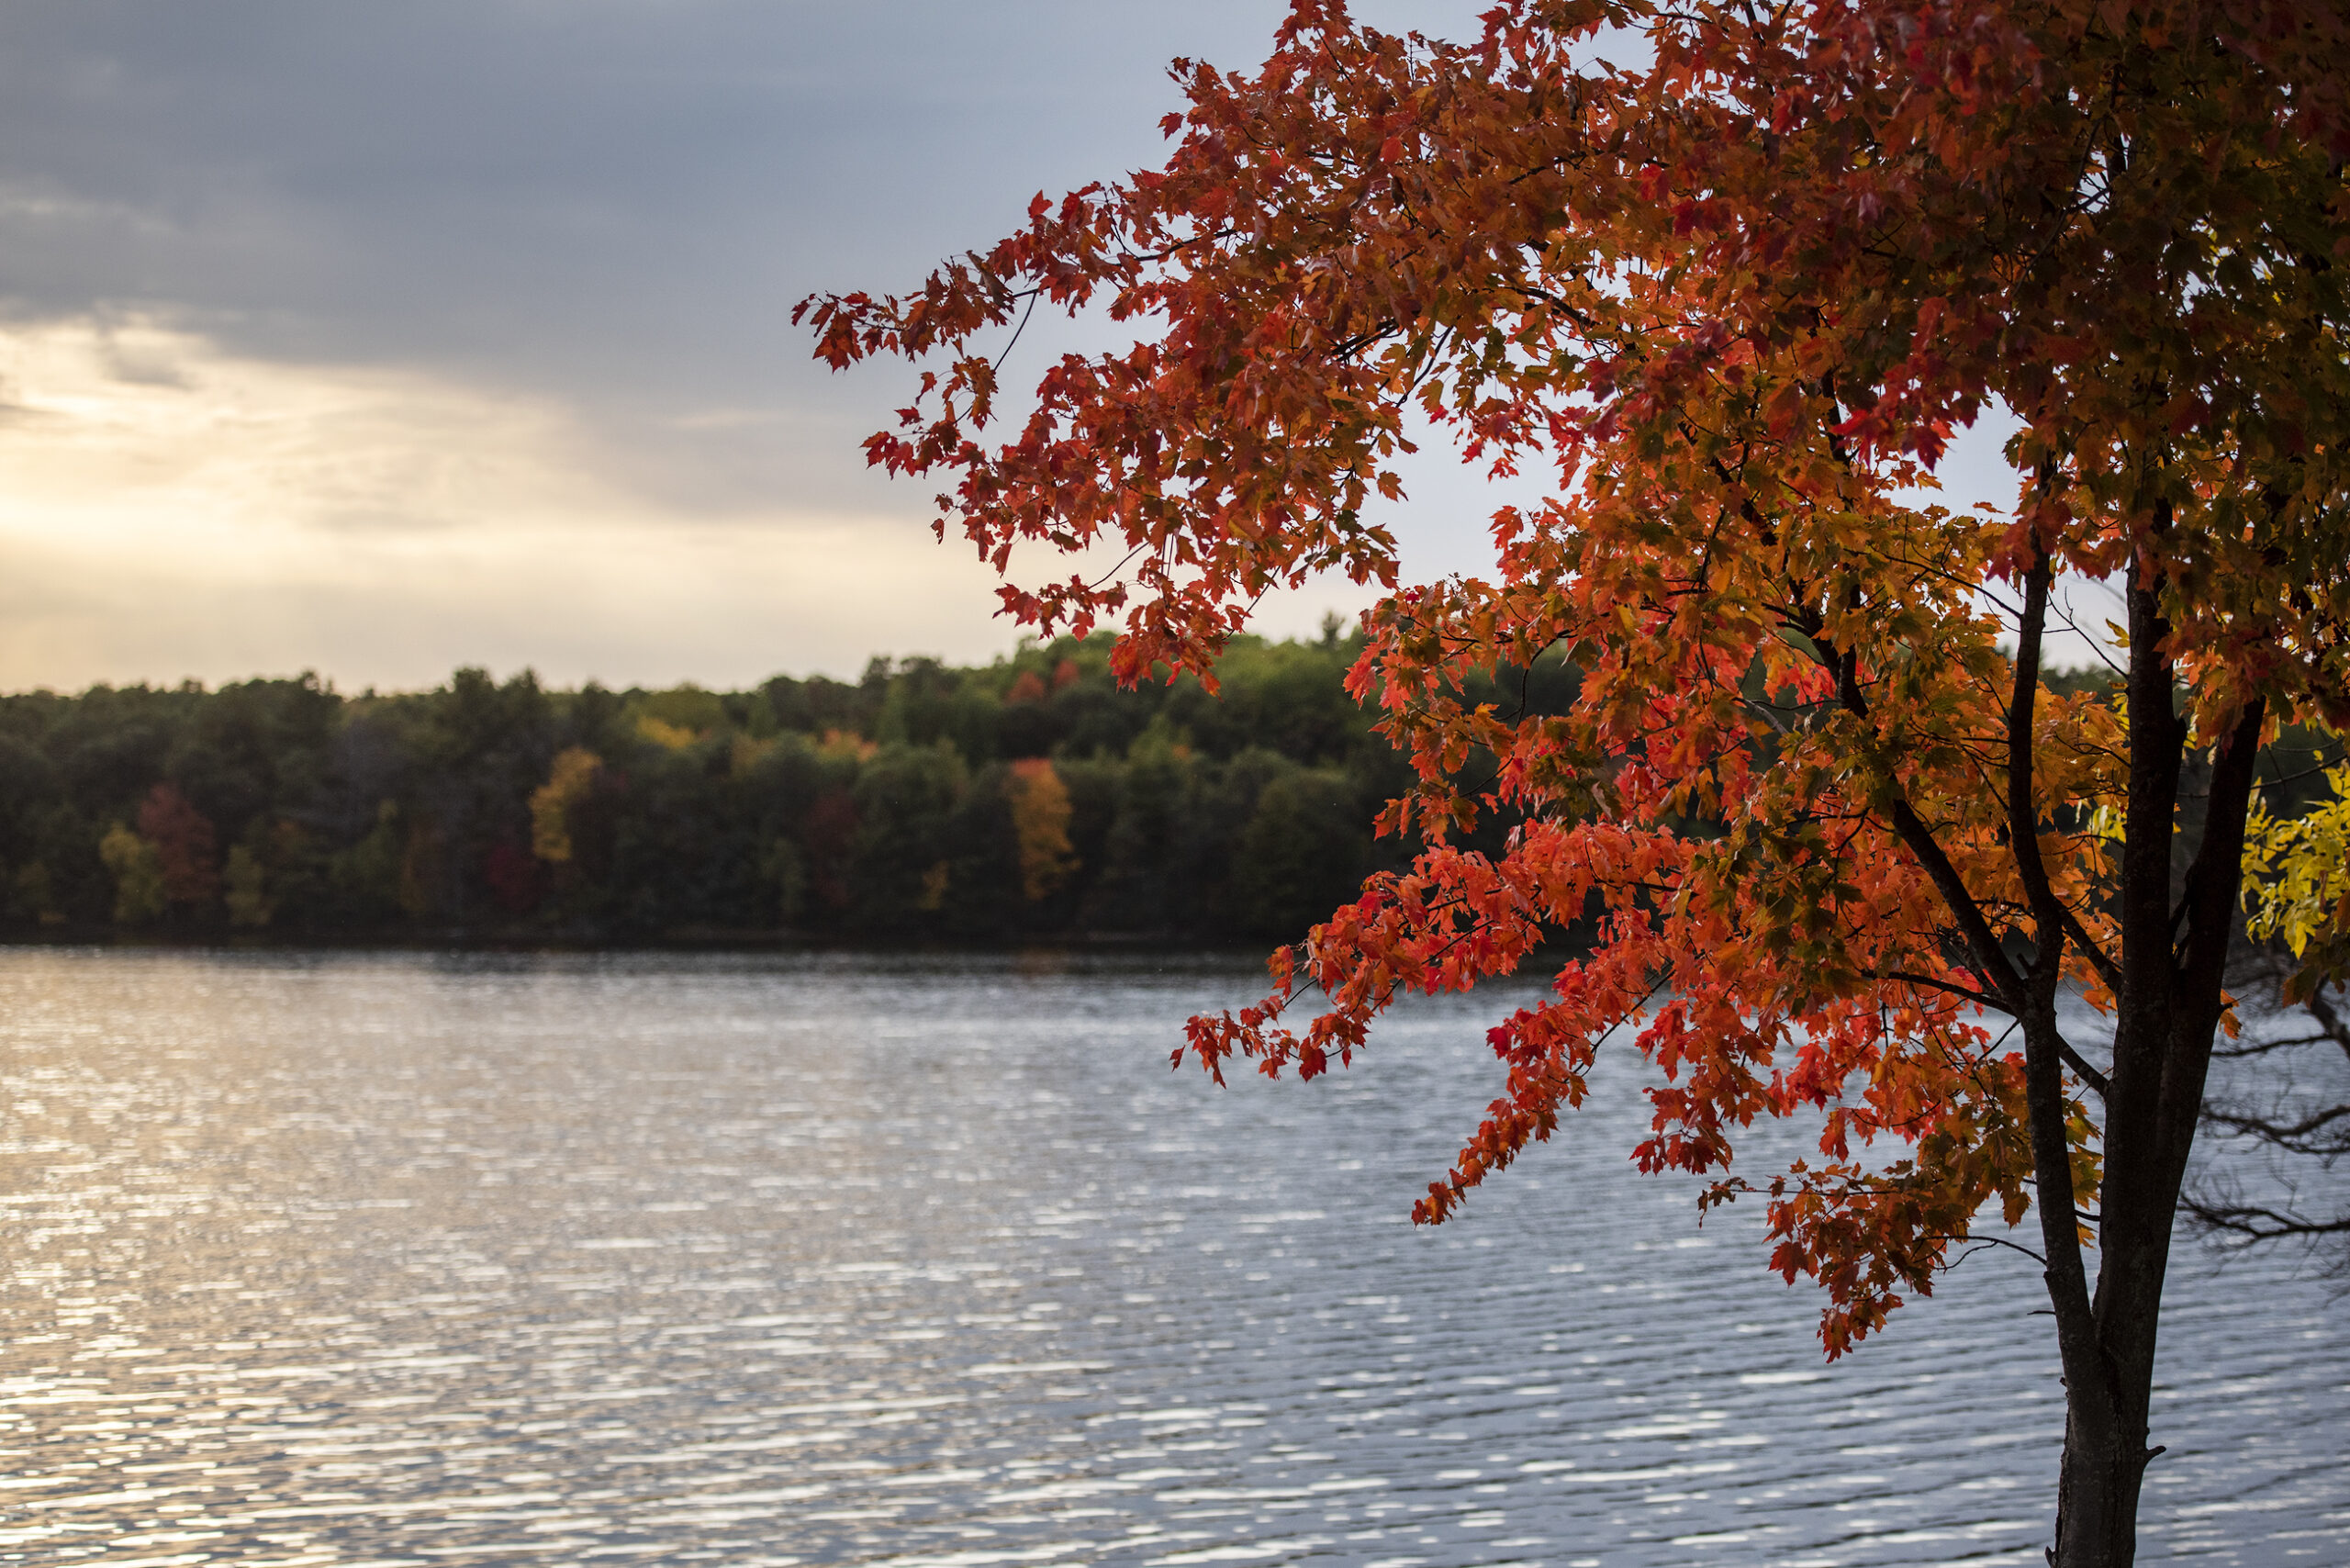 Water from a lake is the backdrop of a tree with bright red leaves.